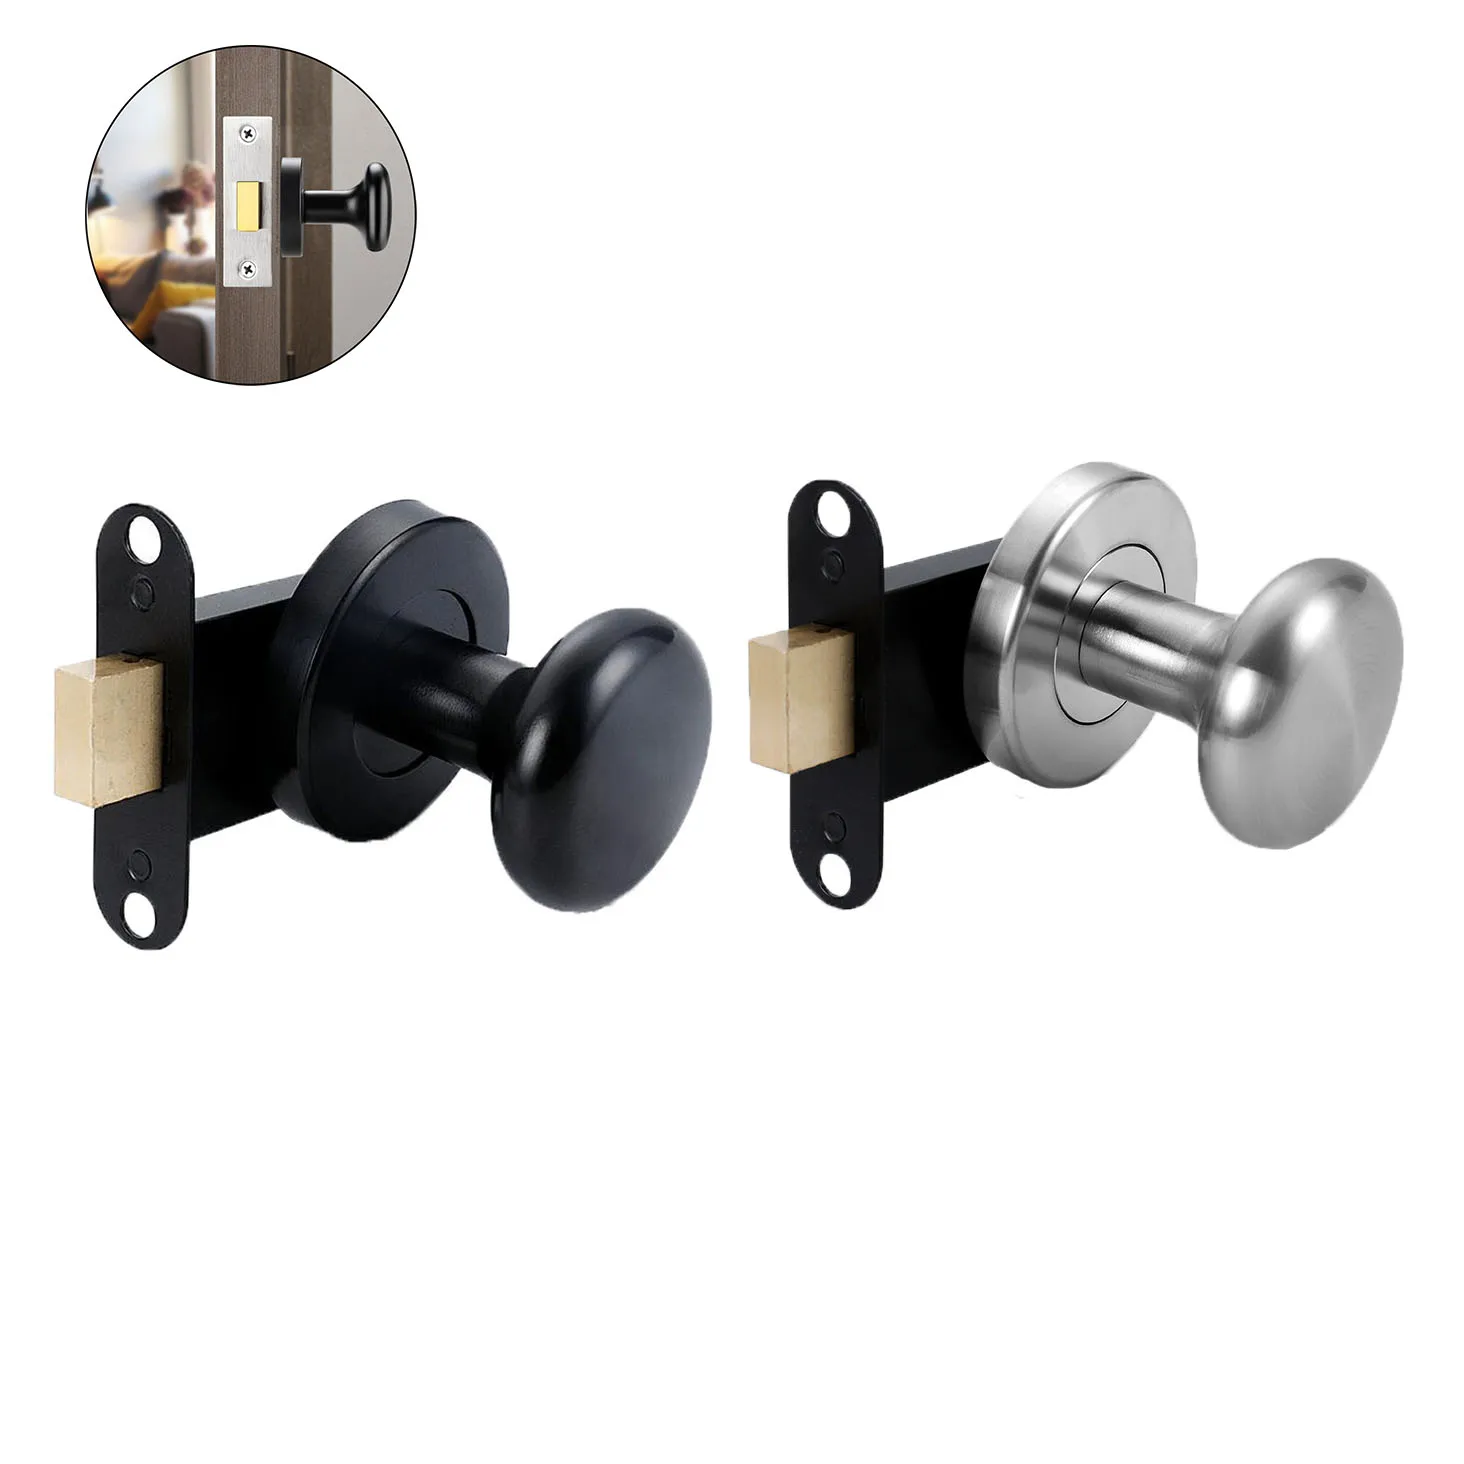 1 Piece Zinc Alloy Single-sided Round Silent Invisible Door Lock for Bedroom/ Home Room / Door Back Wall european standard silent round square panel 24x240mm lock body with hook silent lock tongue round and square pane door hardware